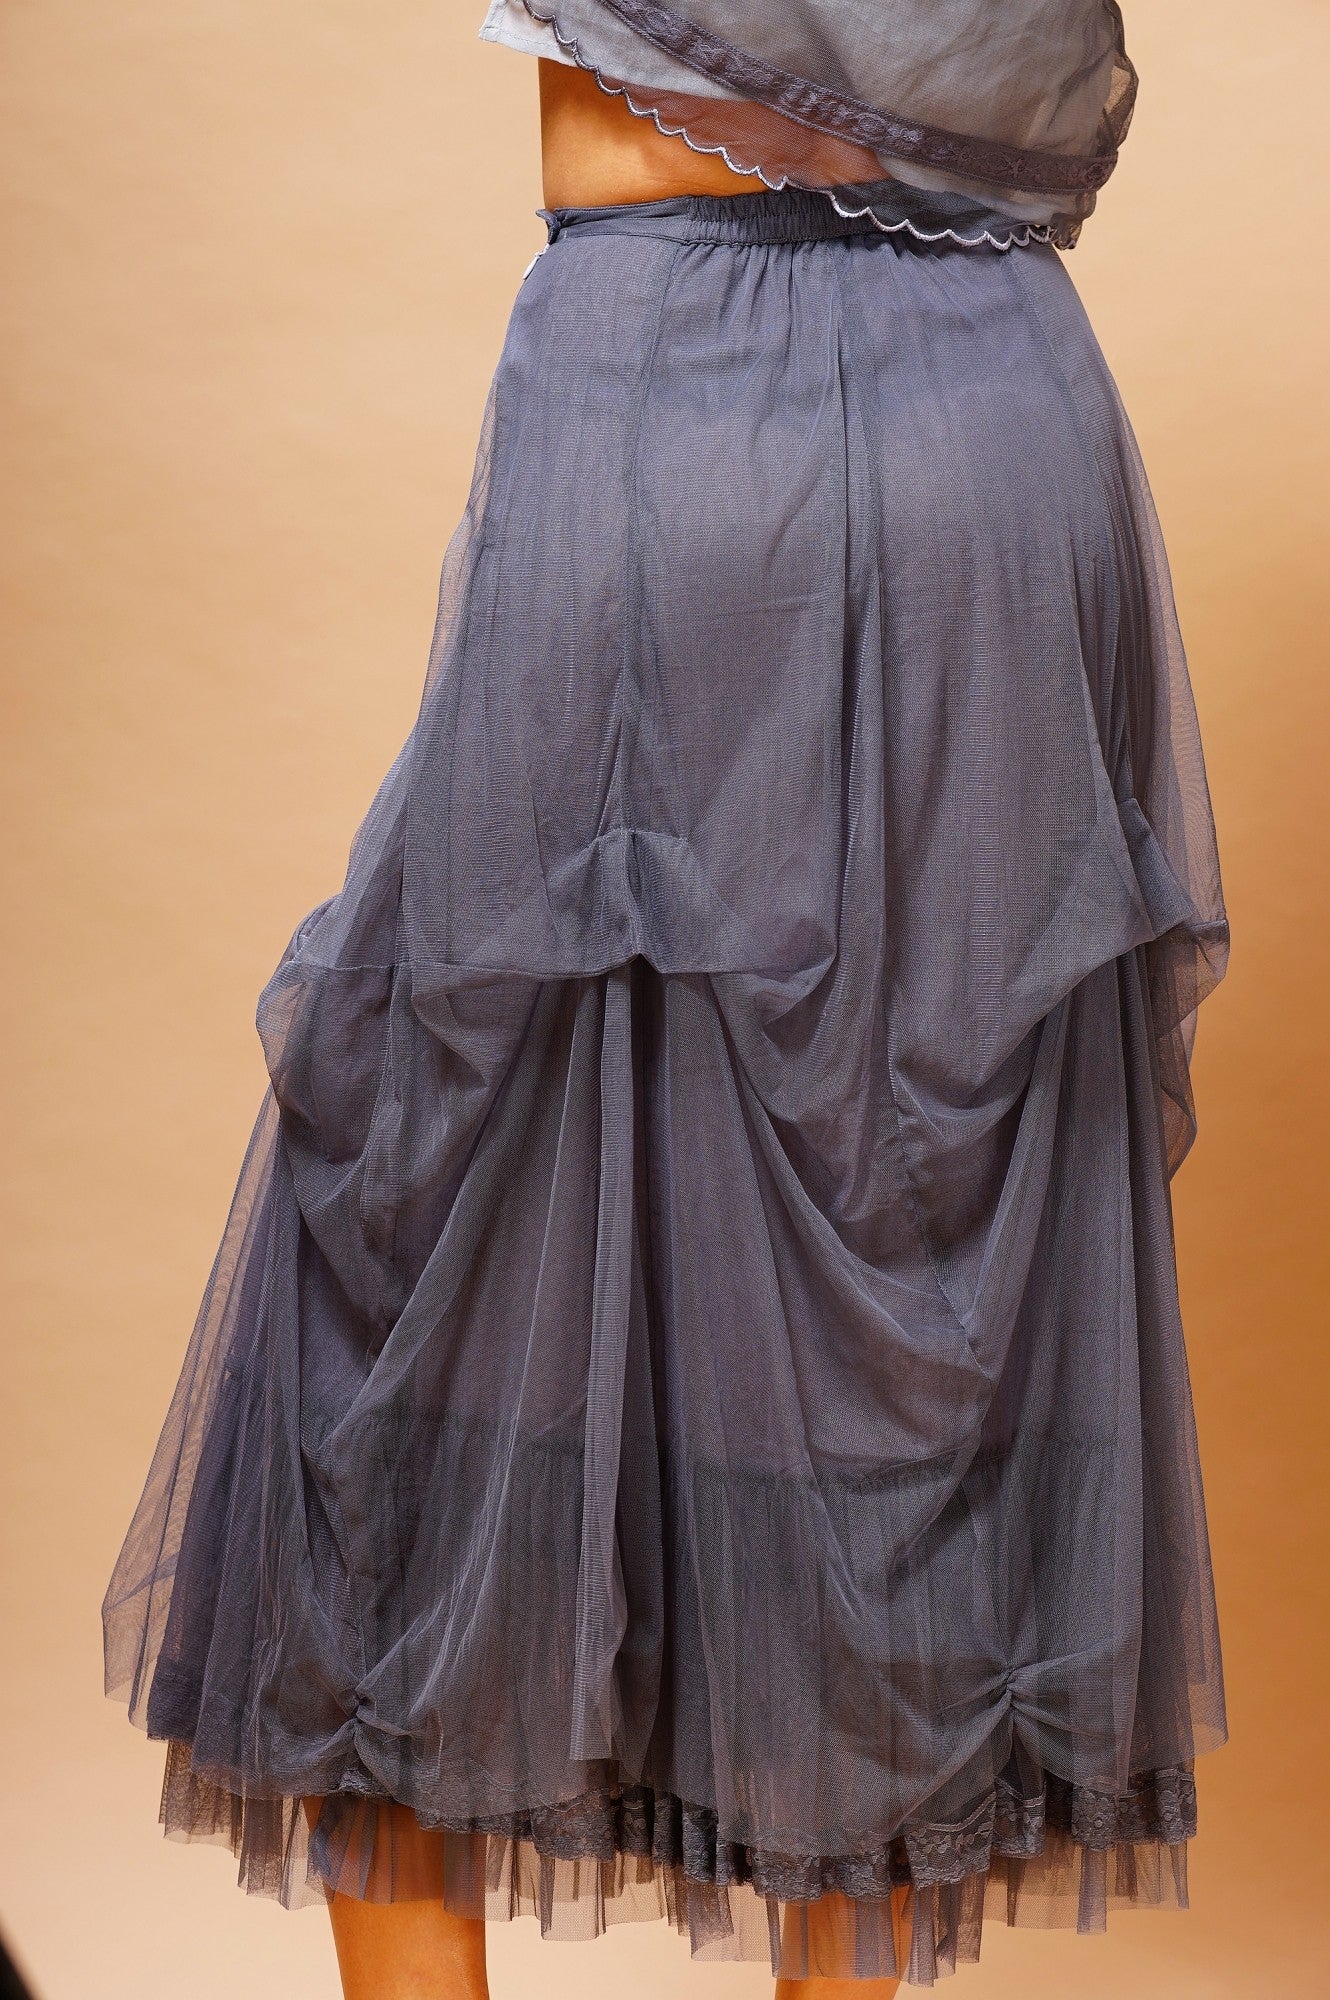 Vintage Inspired Romantic Skirt in Blue by Nataya - SOLD OUT